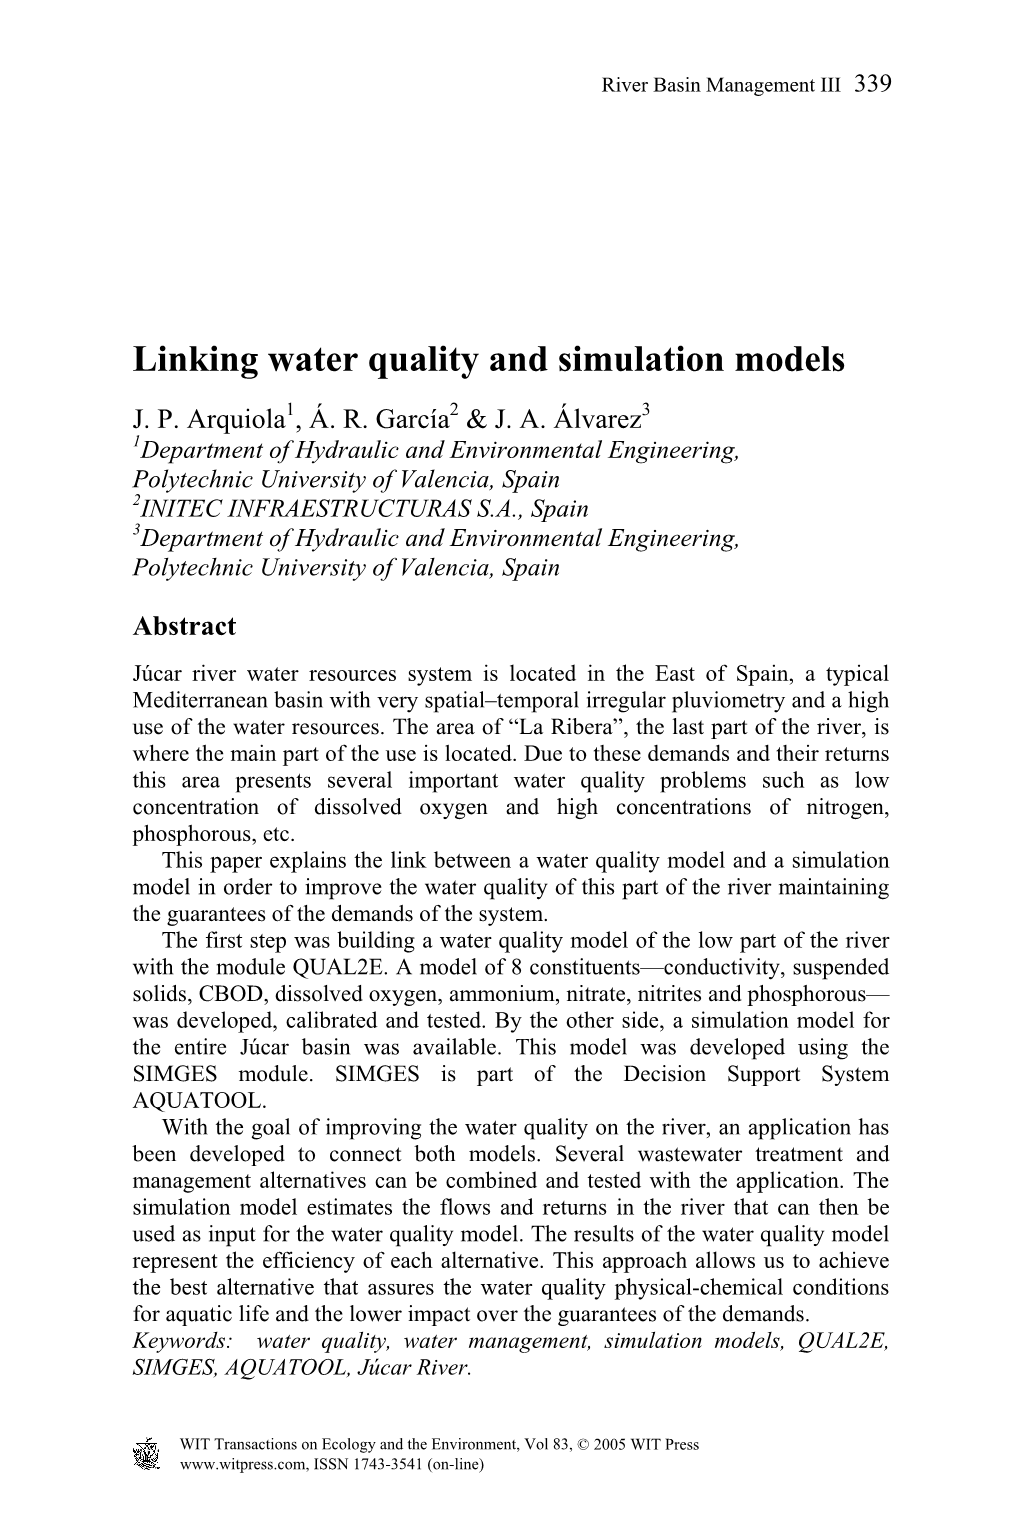 Linking Water Quality and Simulation Models J